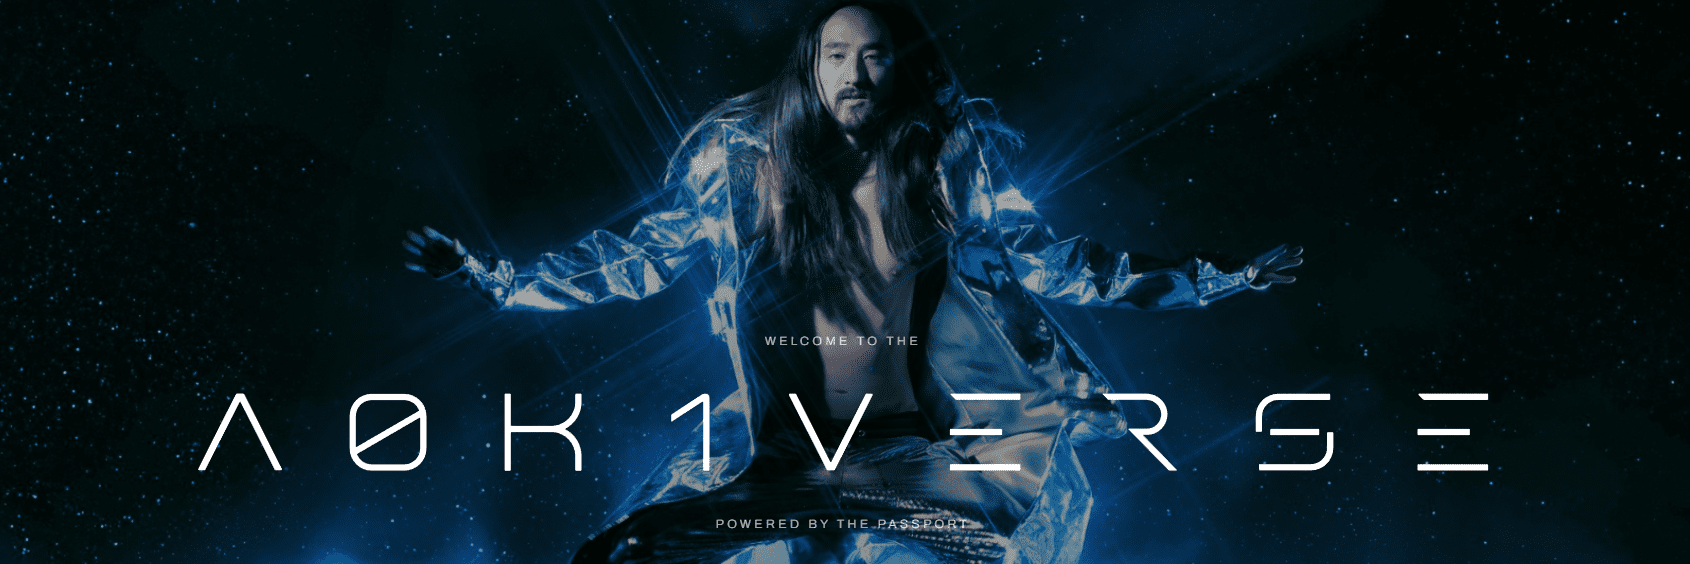 CHAPTER 2 WELCOMES STEVE AOKI AND HIS A0K1VERSE